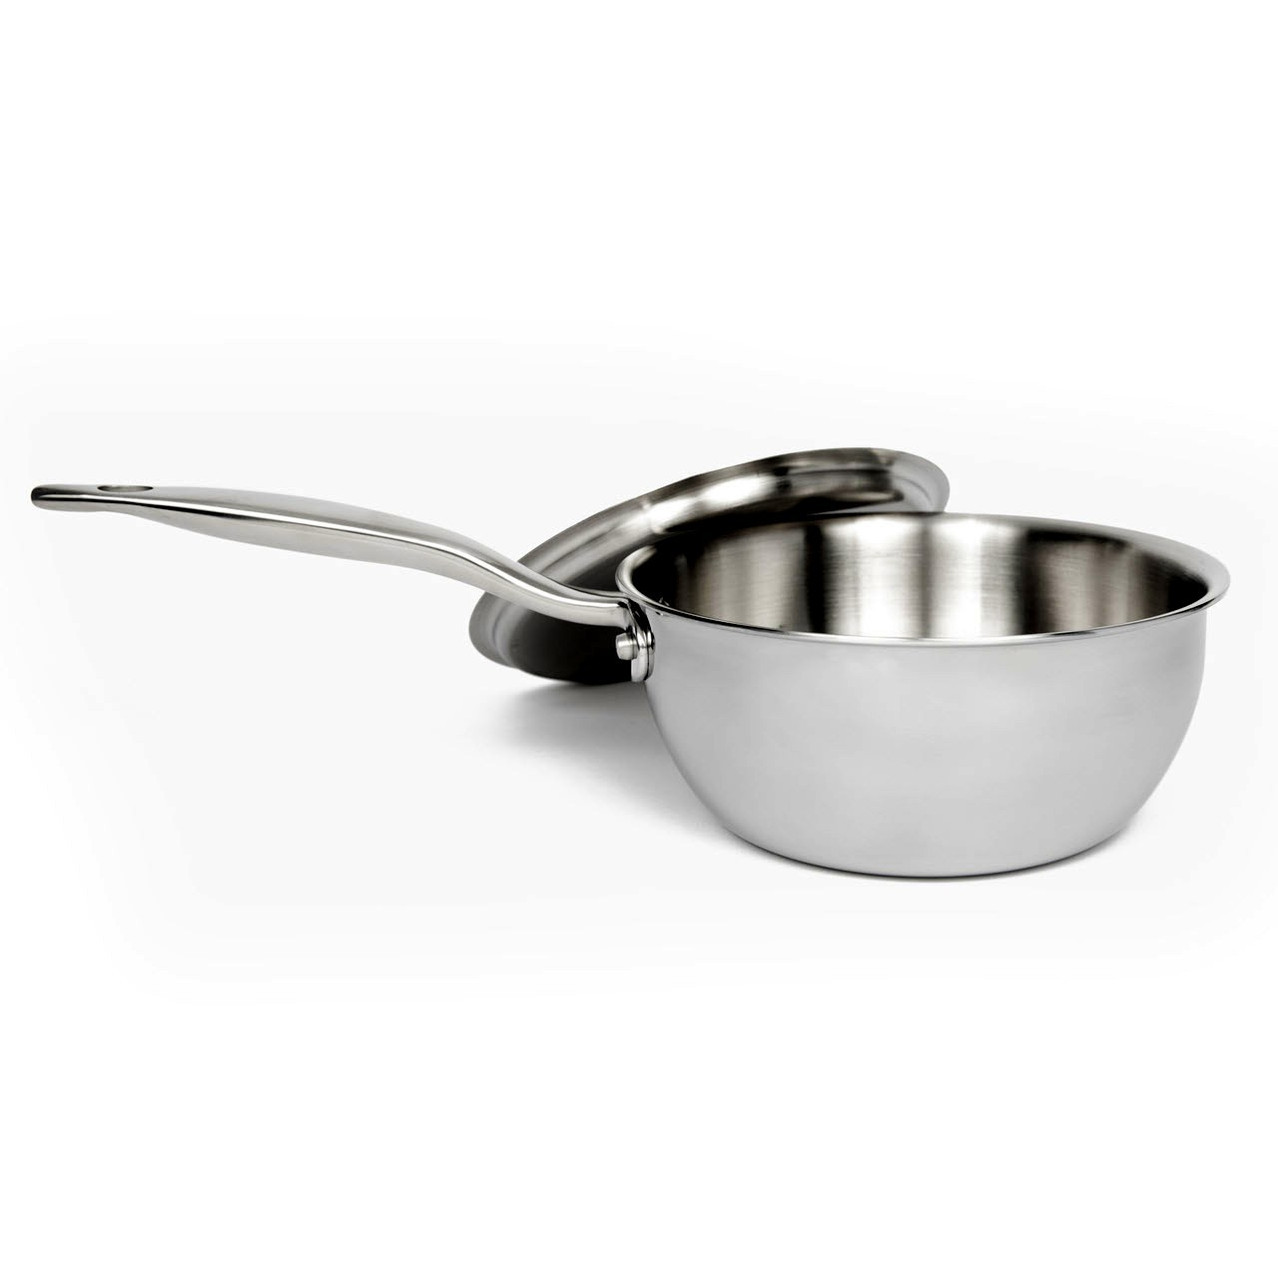  Heritage Steel 3 Quart Saucier - Titanium Strengthened 316Ti  Stainless Steel with 5-Ply Construction - Induction-Ready and Fully Clad,  Made in USA: Home & Kitchen